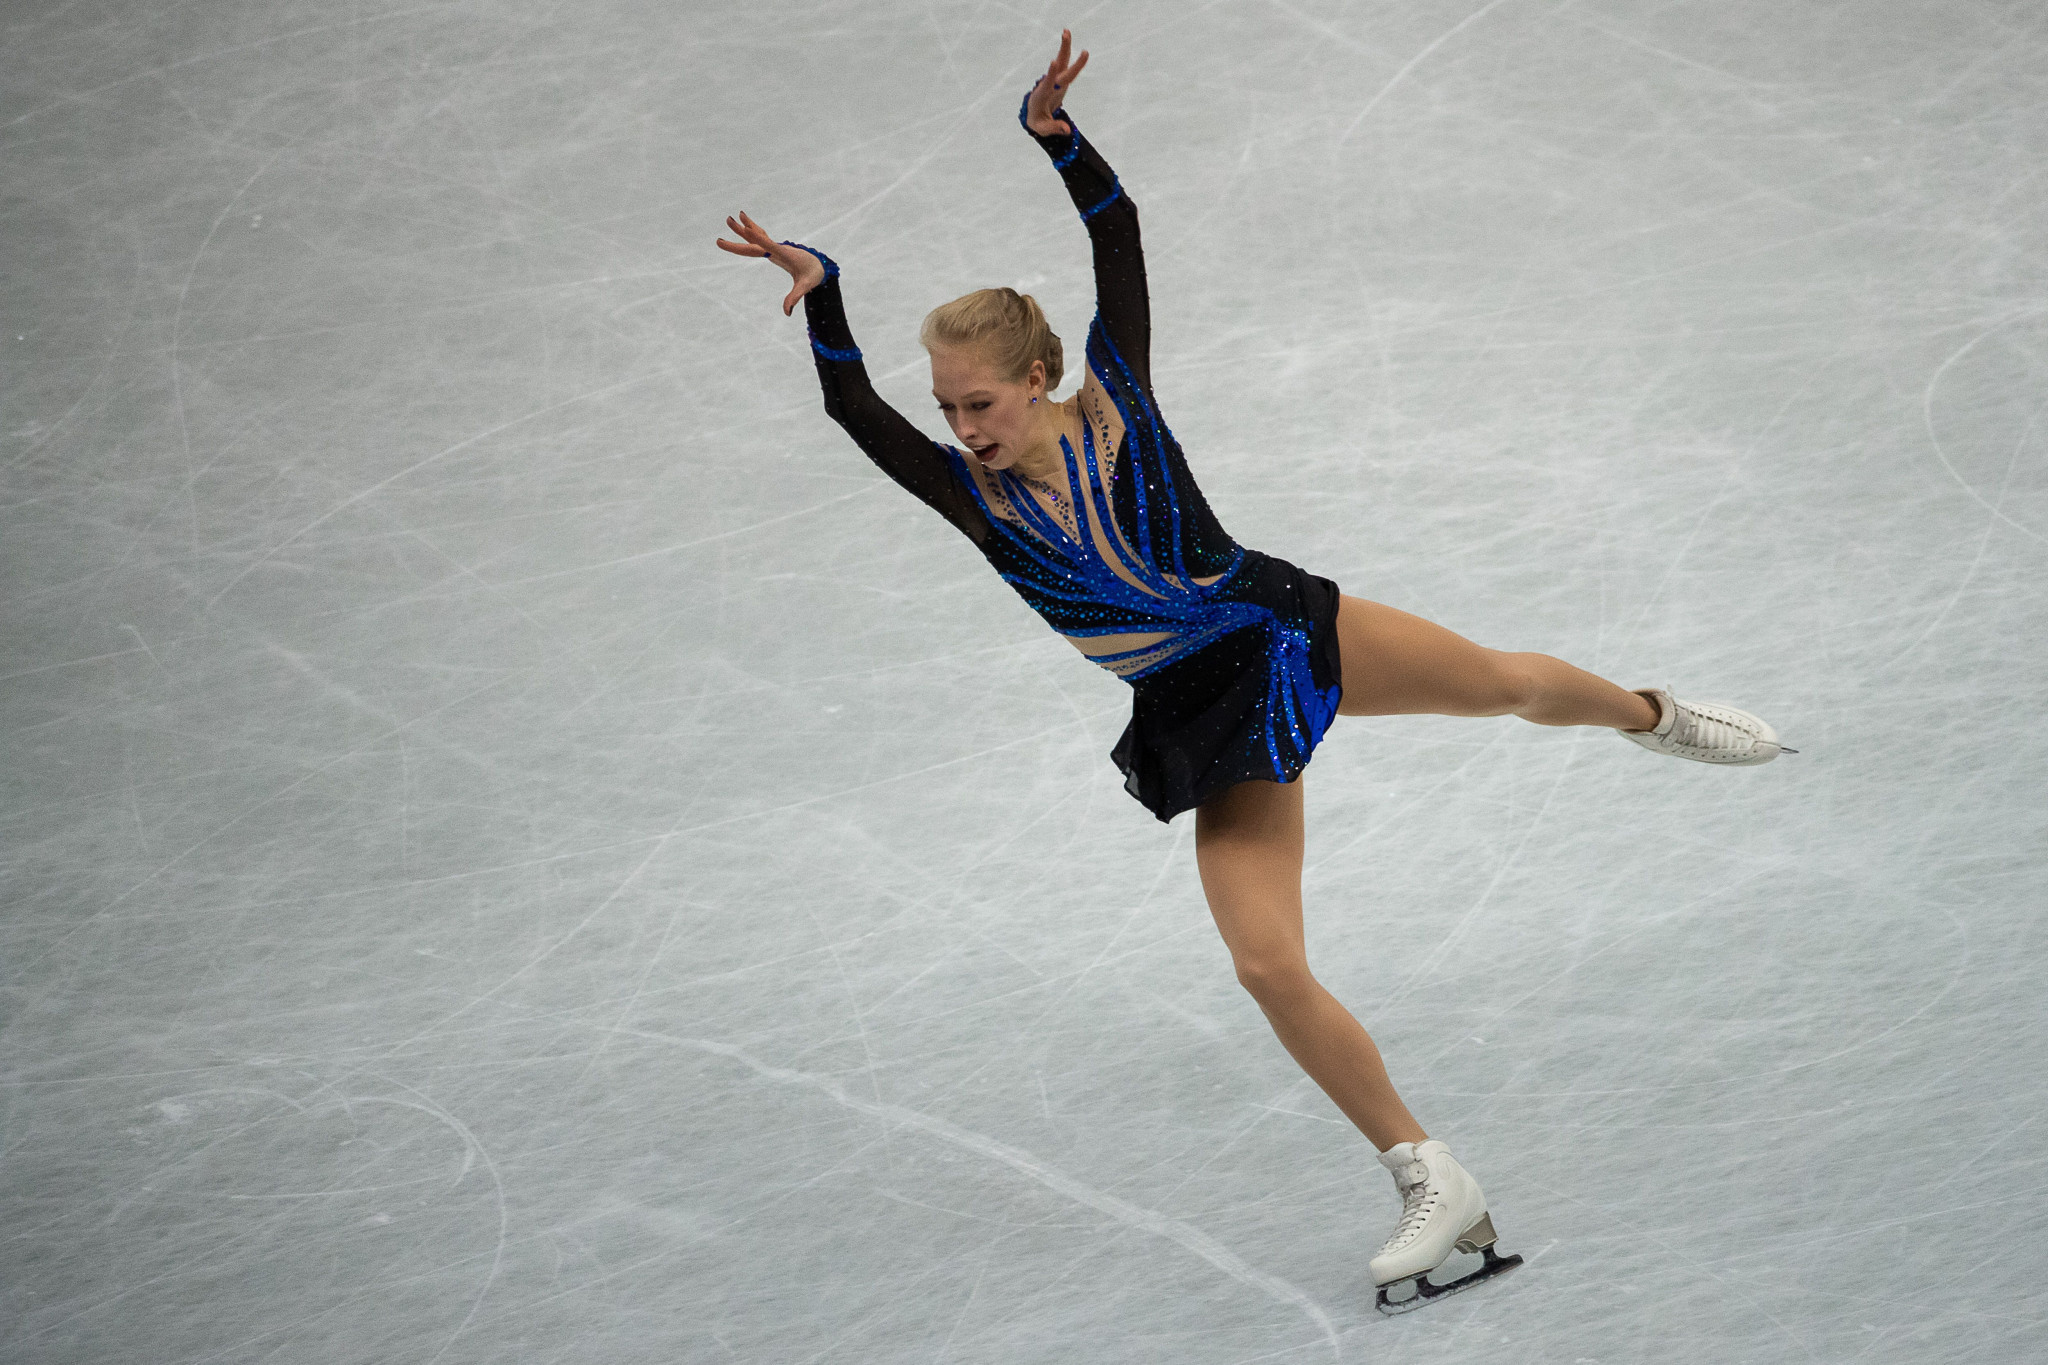 Bradie Tennell of the United States scored the most points in the women's programme ©Getty Images